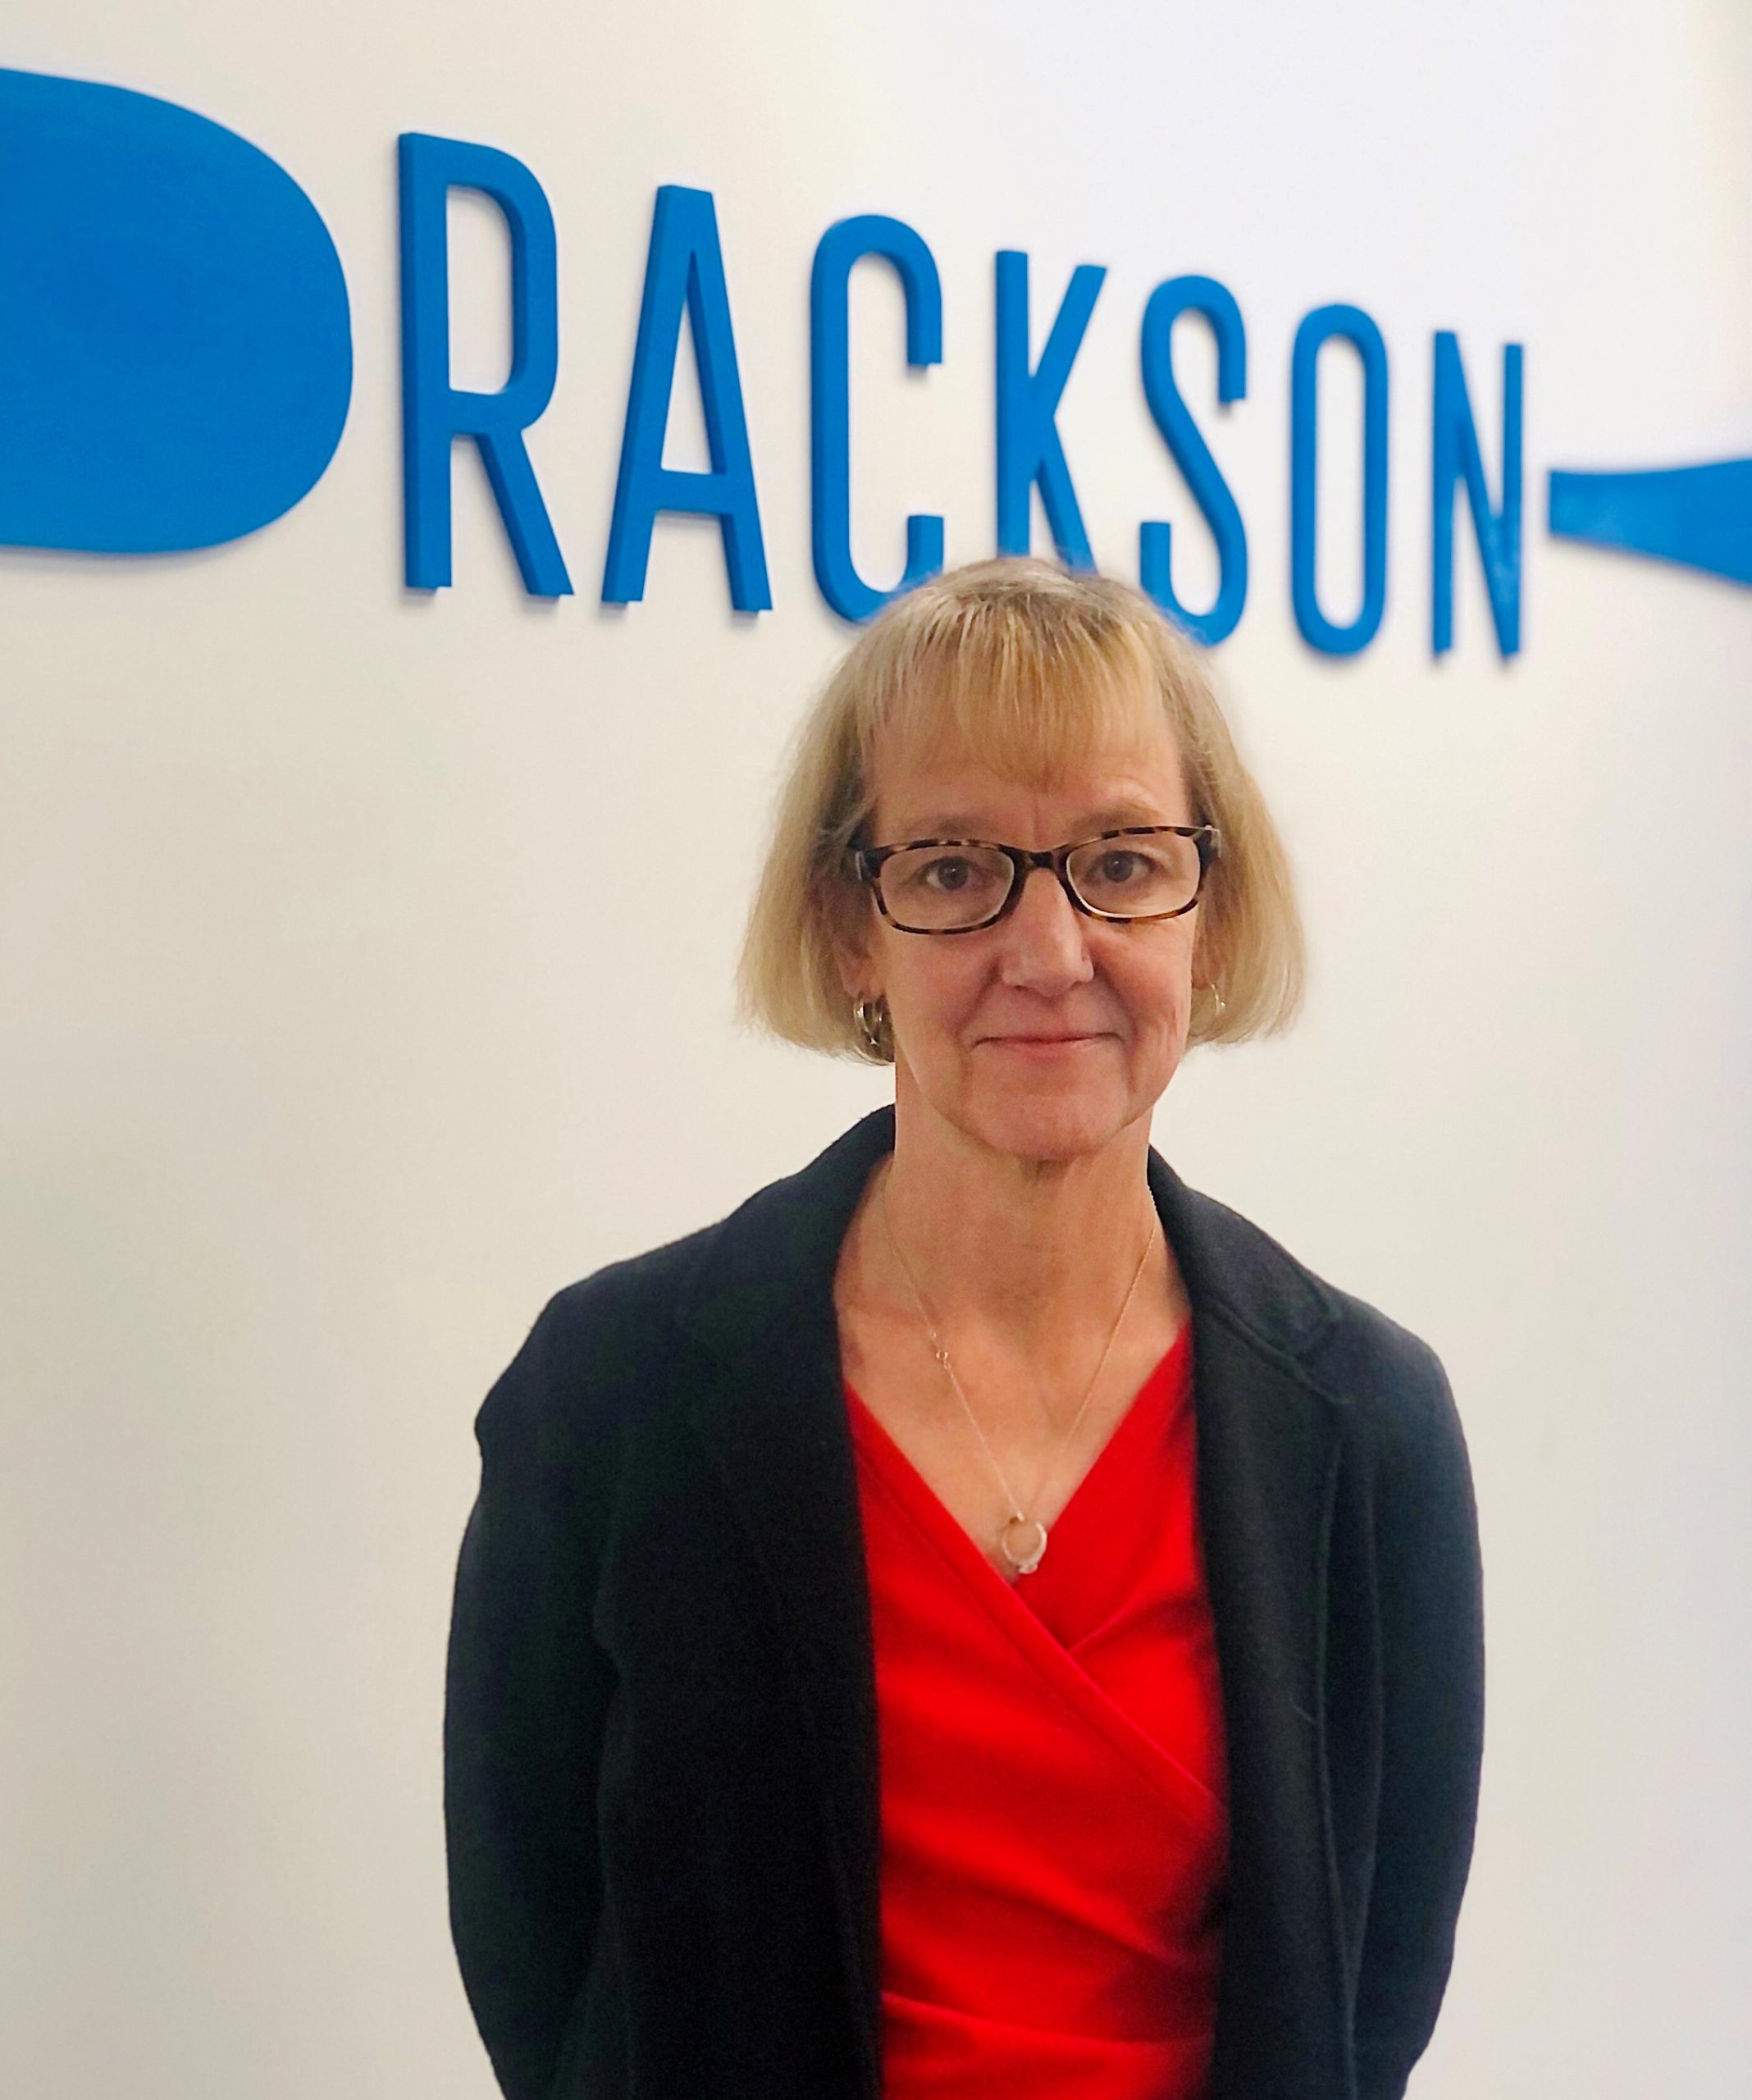 Read more about the article Rackson hires new CFO, Susan Daggett